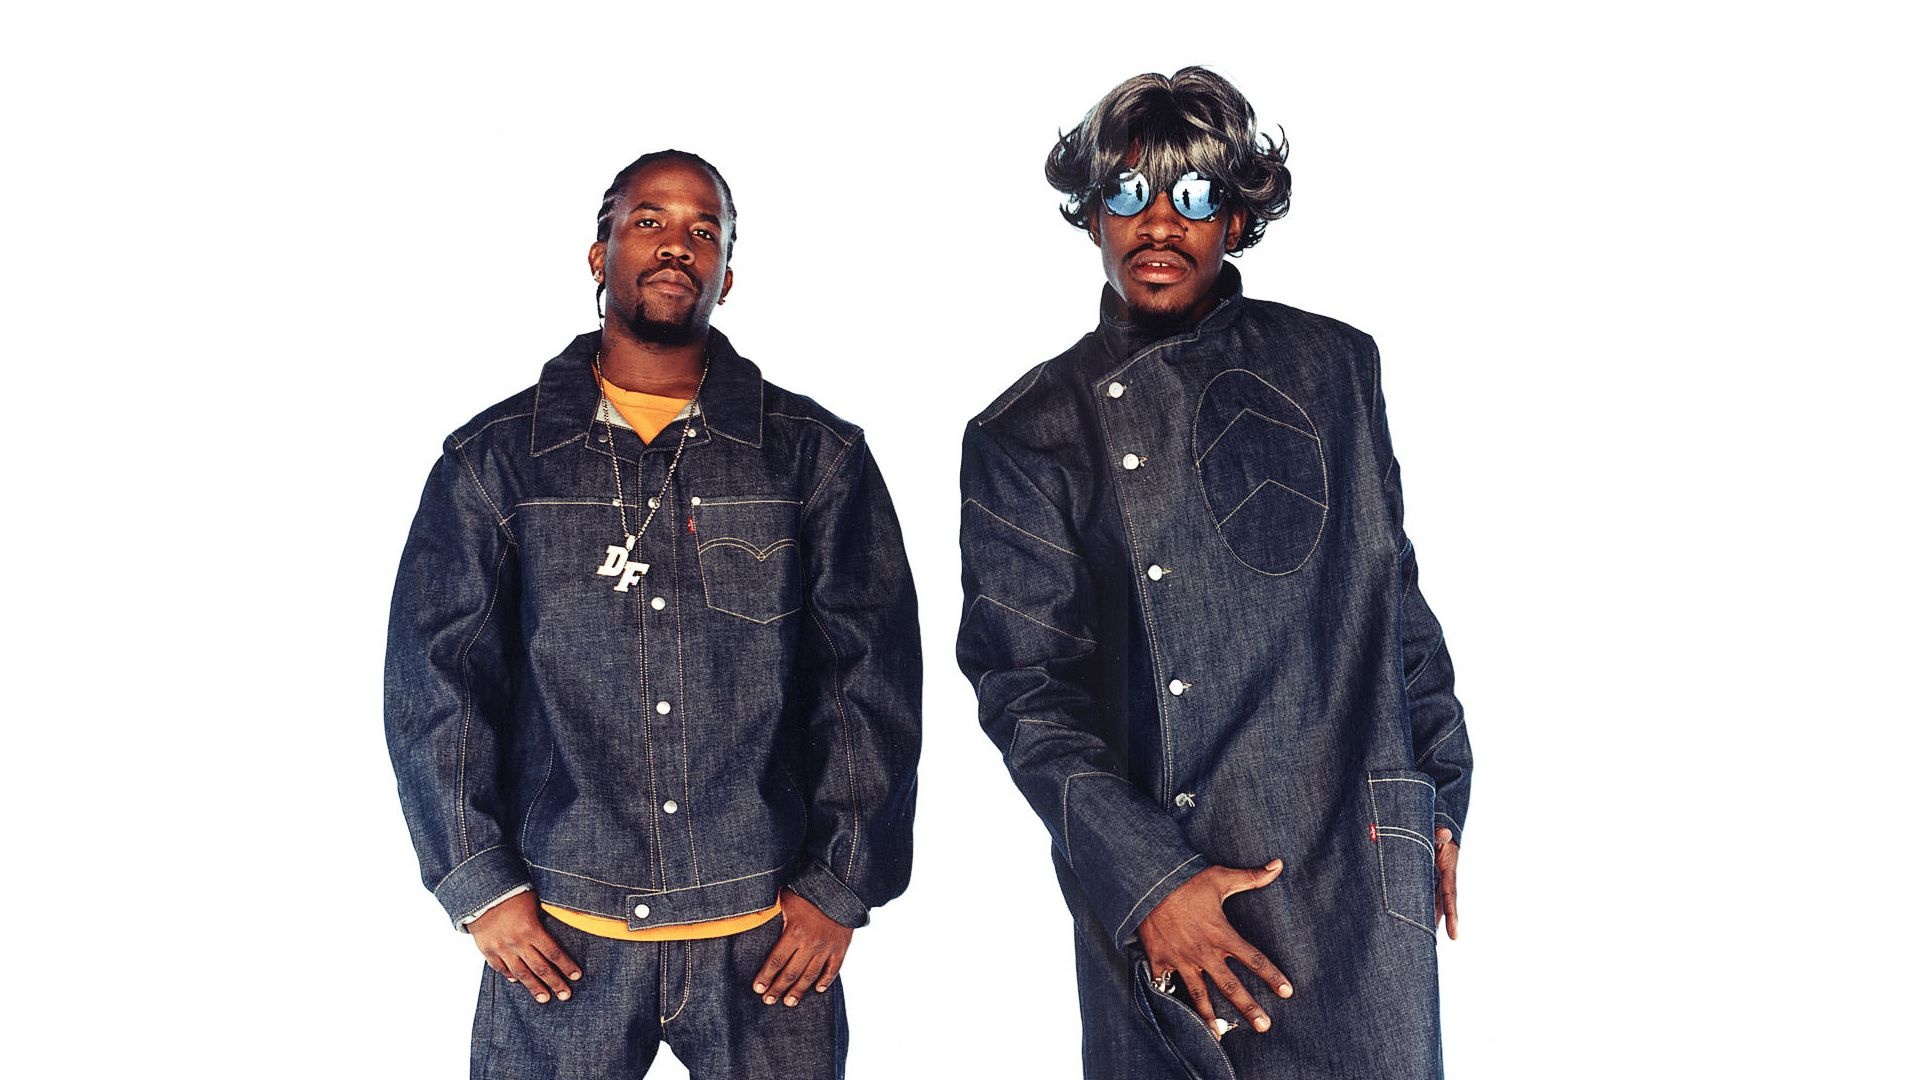 OutKast Wallpapers - Top Free OutKast Backgrounds 1920x1080